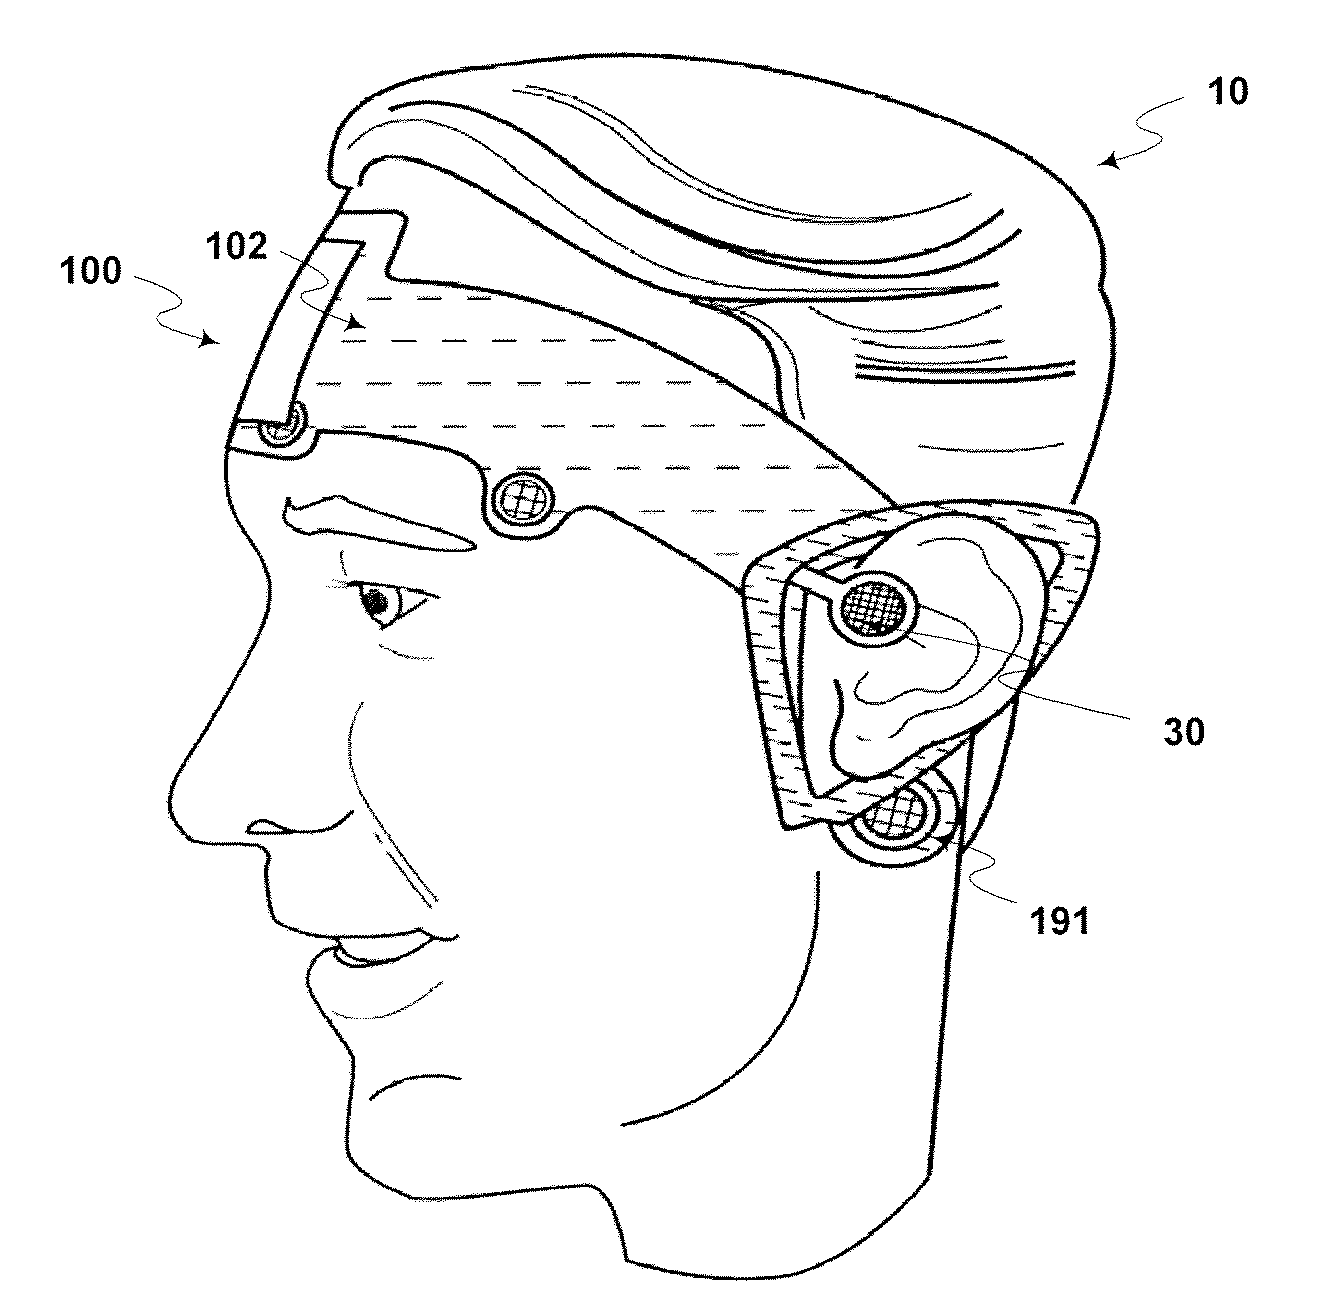 Systems and Methods For Neurological Evaluation and Treatment Guidance